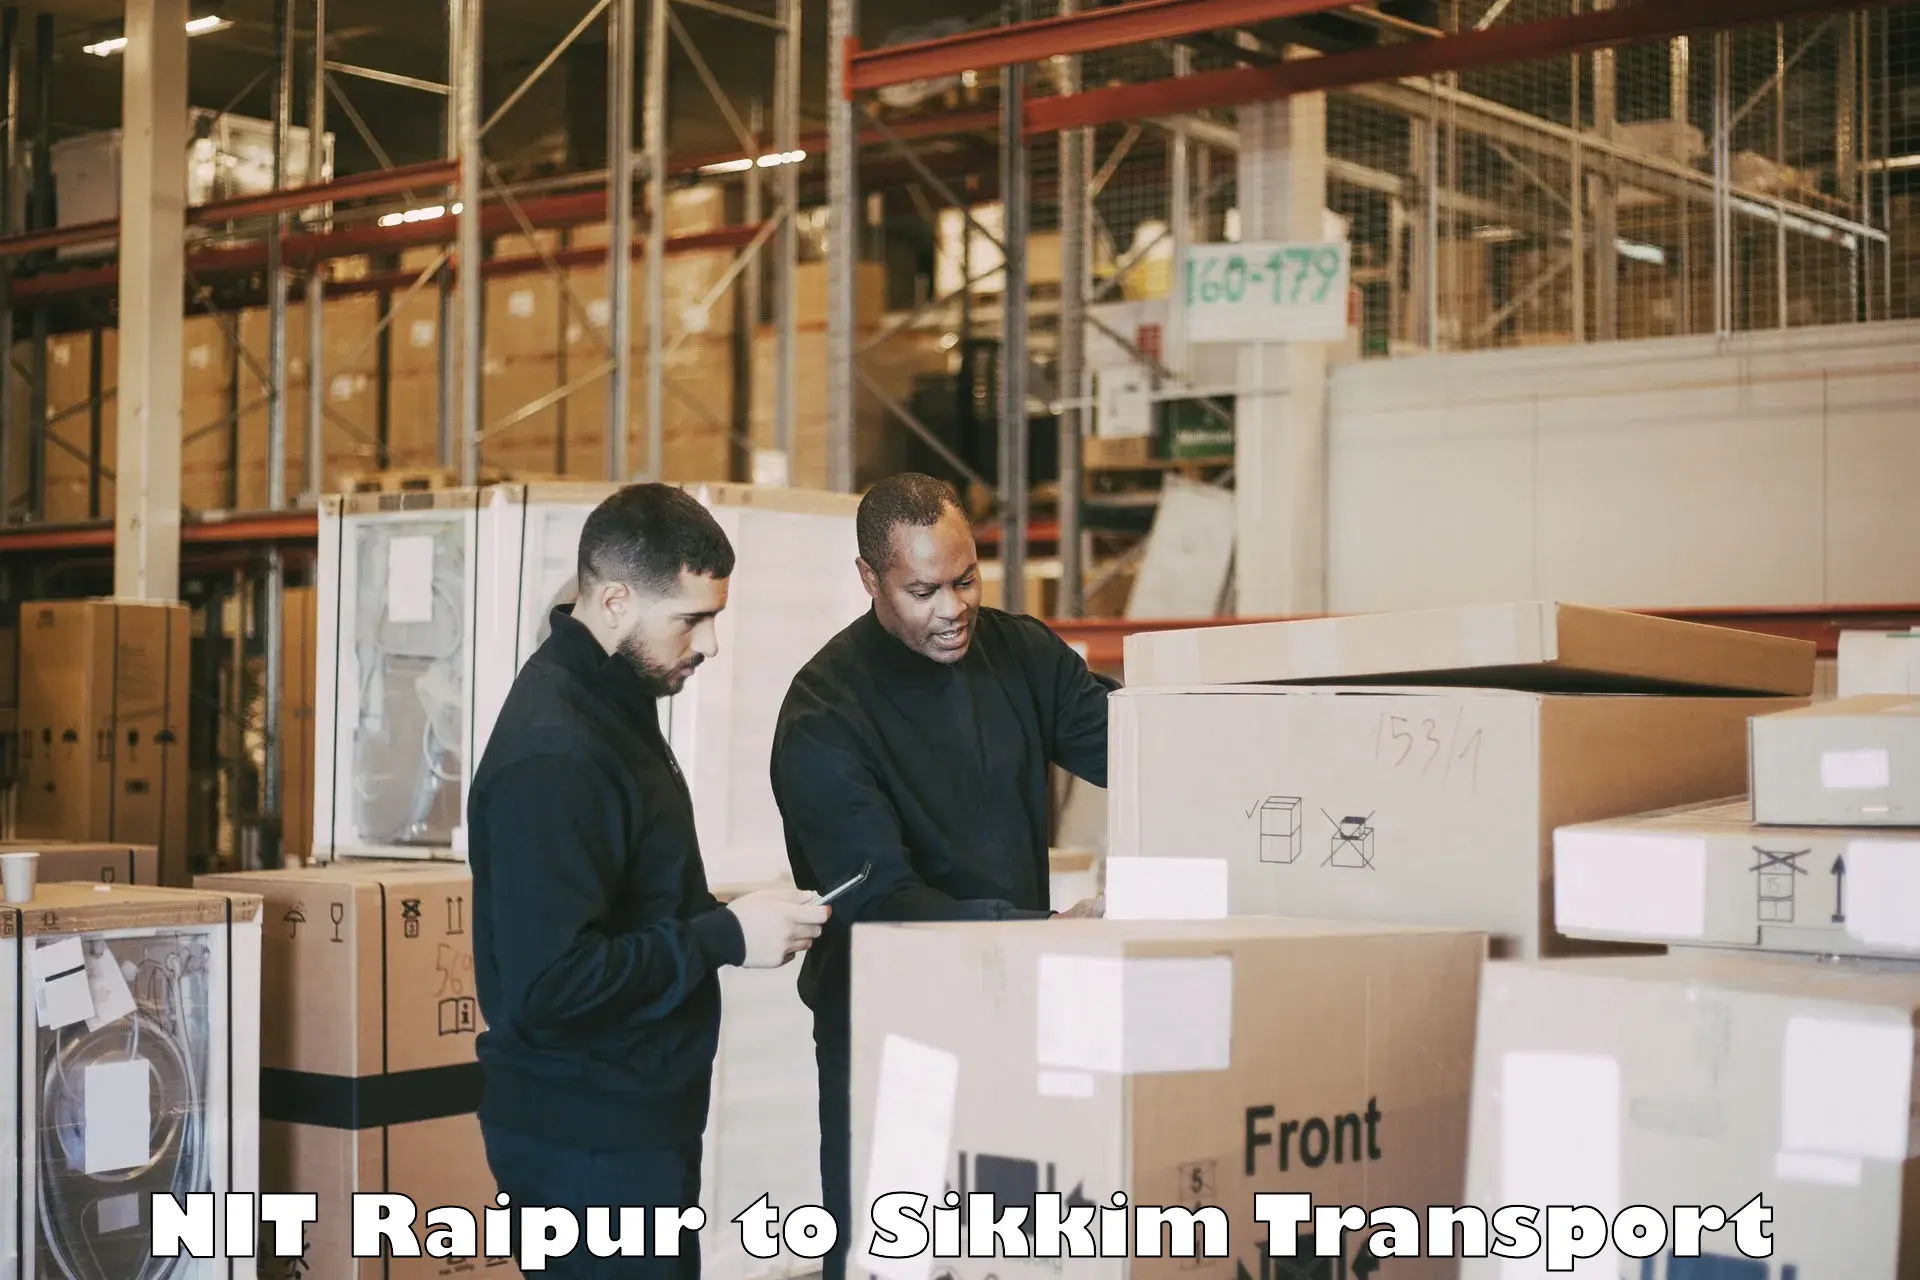 Express transport services NIT Raipur to North Sikkim